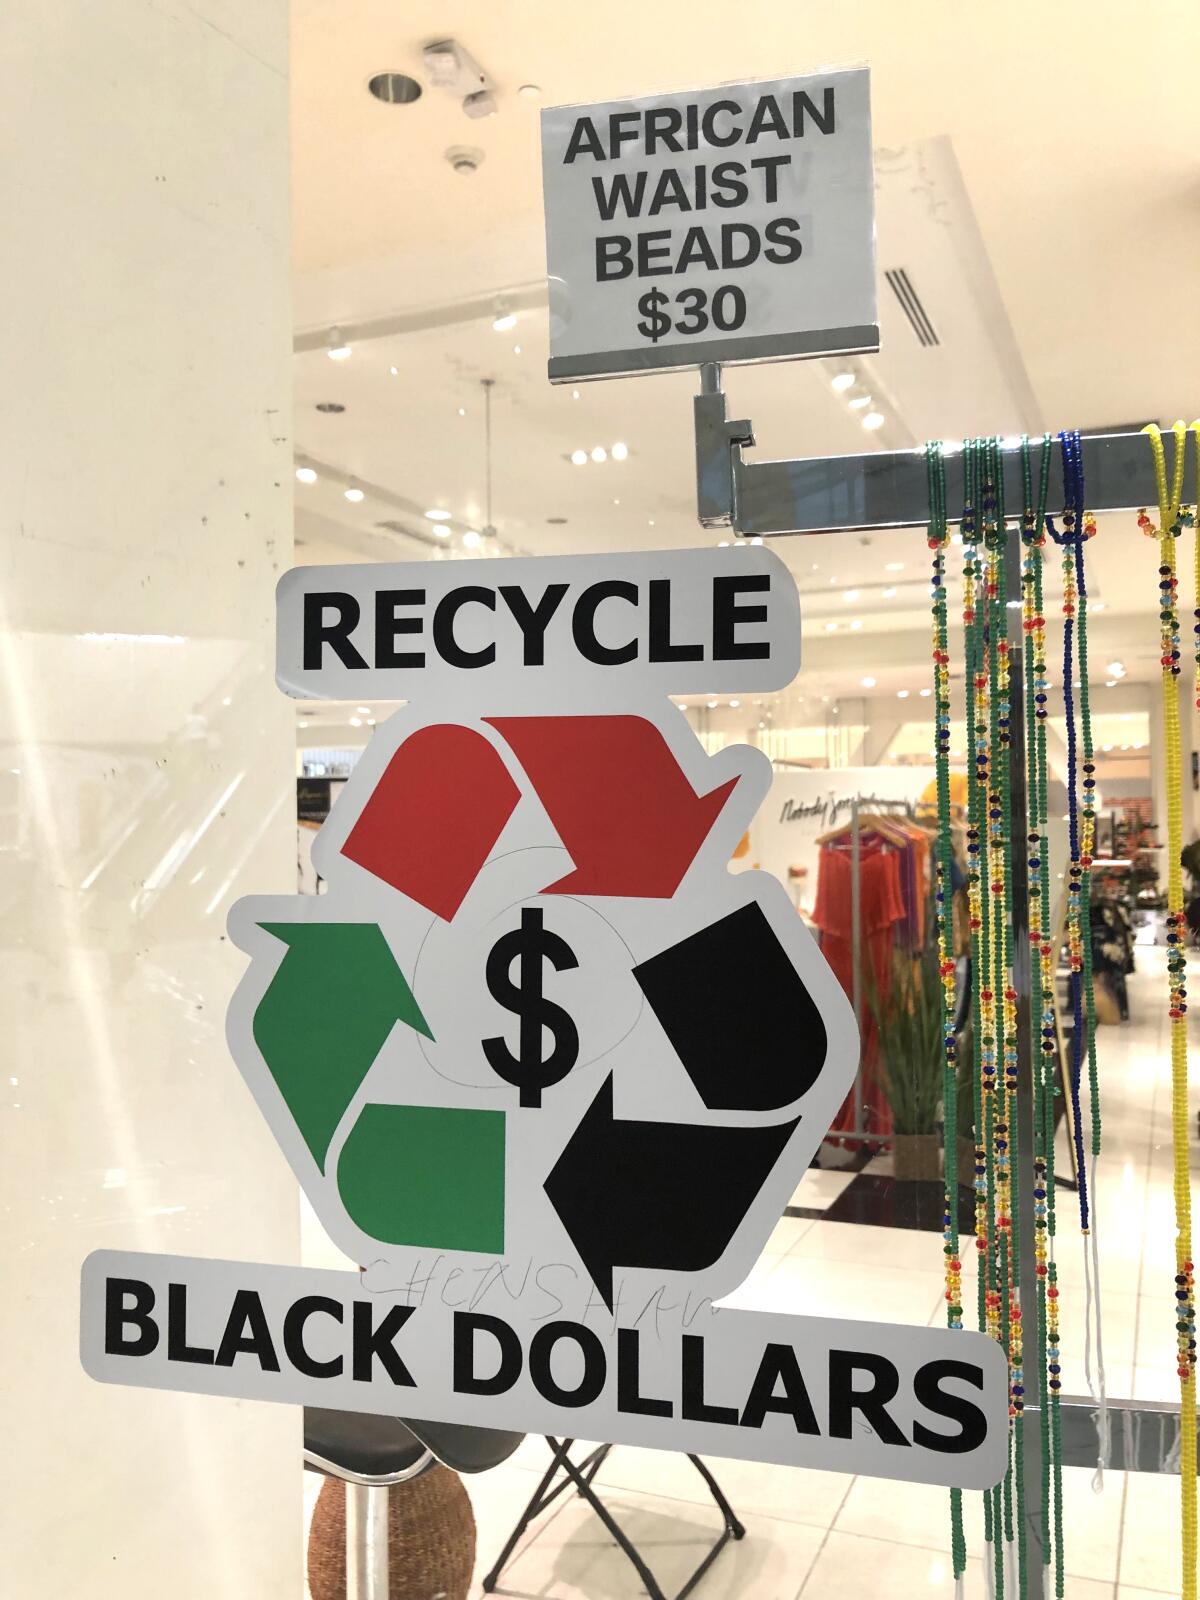 A "Recycle Black Dollars" sign greets those who pass by Afro City Marketplace at Baldwin Hills Crenshaw Plaza.